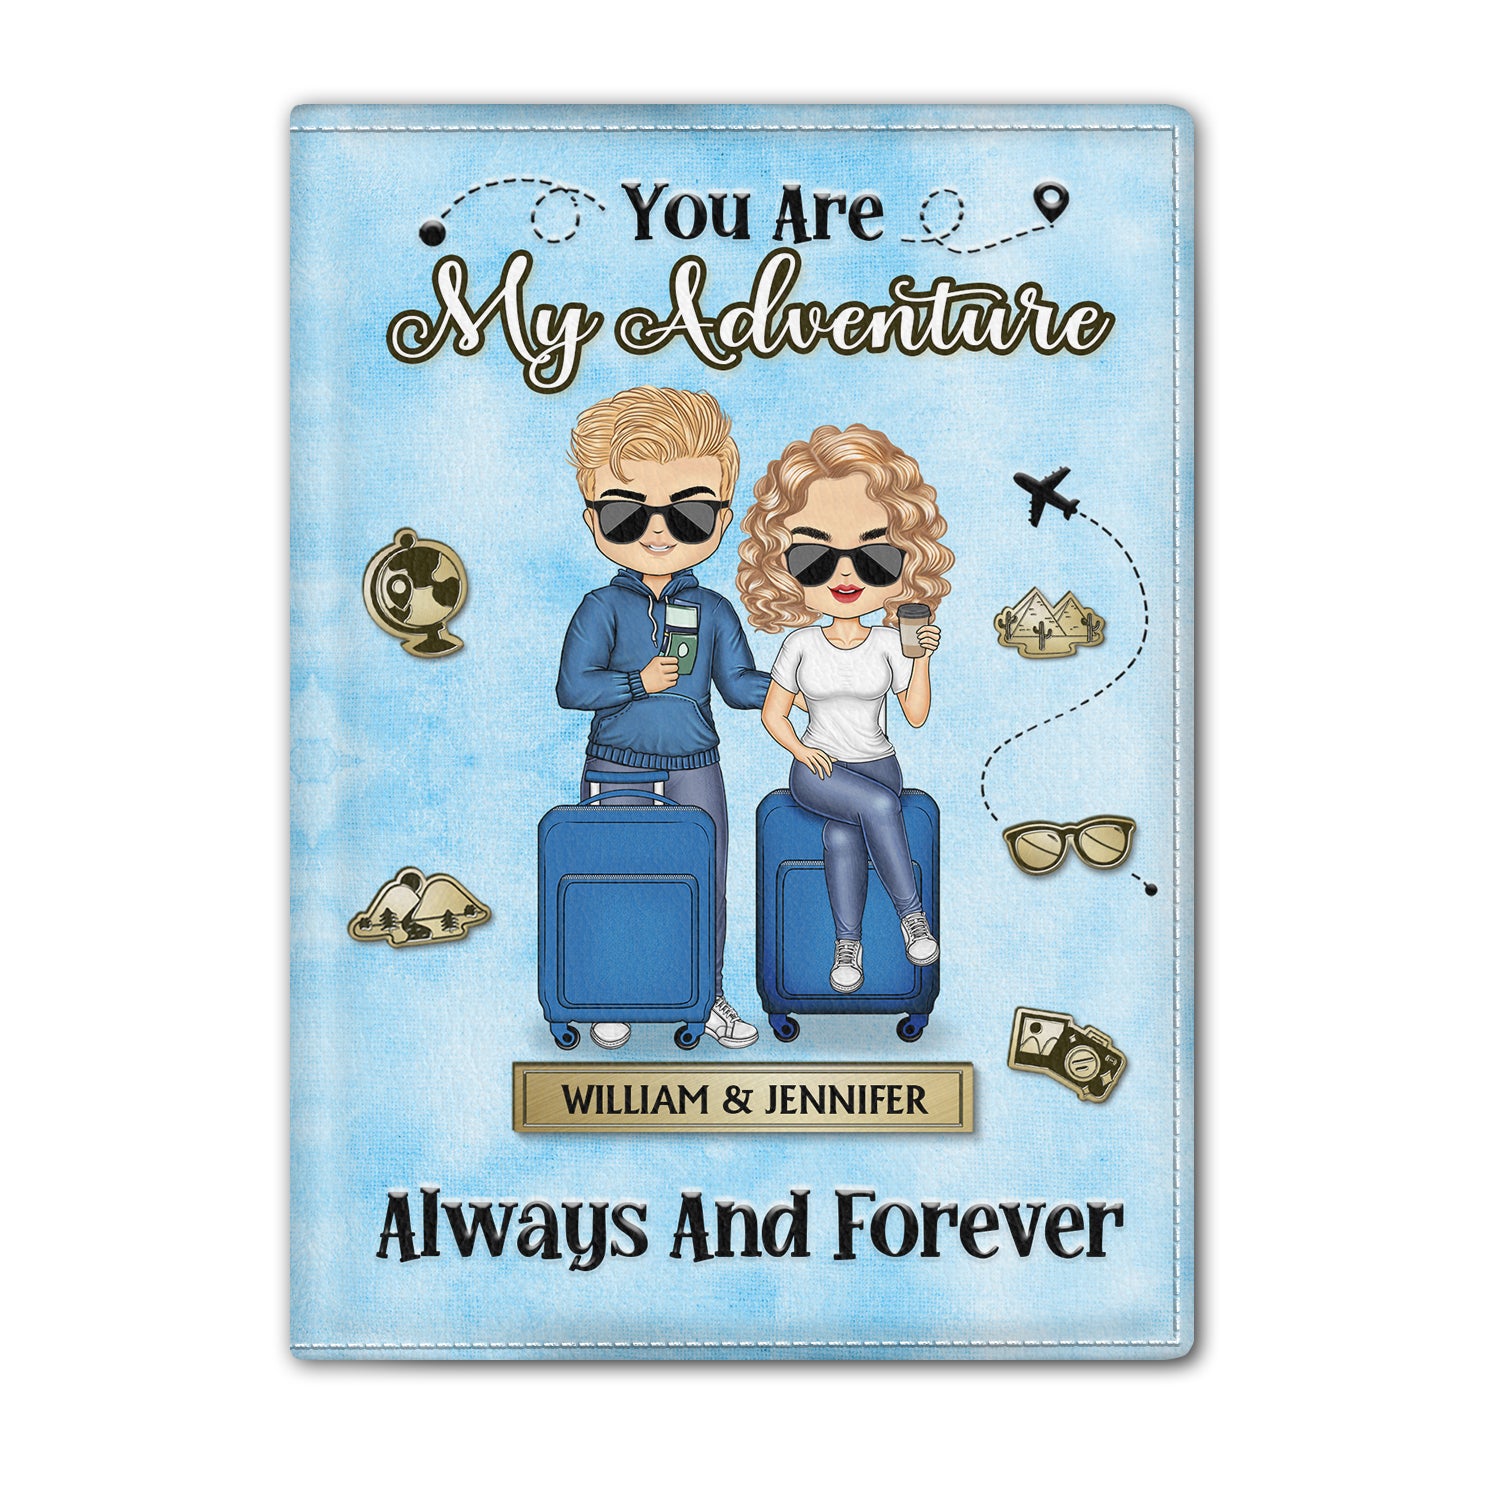 You Are My Adventure Always And Forever - Birthday Gift For Couple, Family, Travel, Vacation Lovers - Personalized Custom Passport Cover, Passport Holder